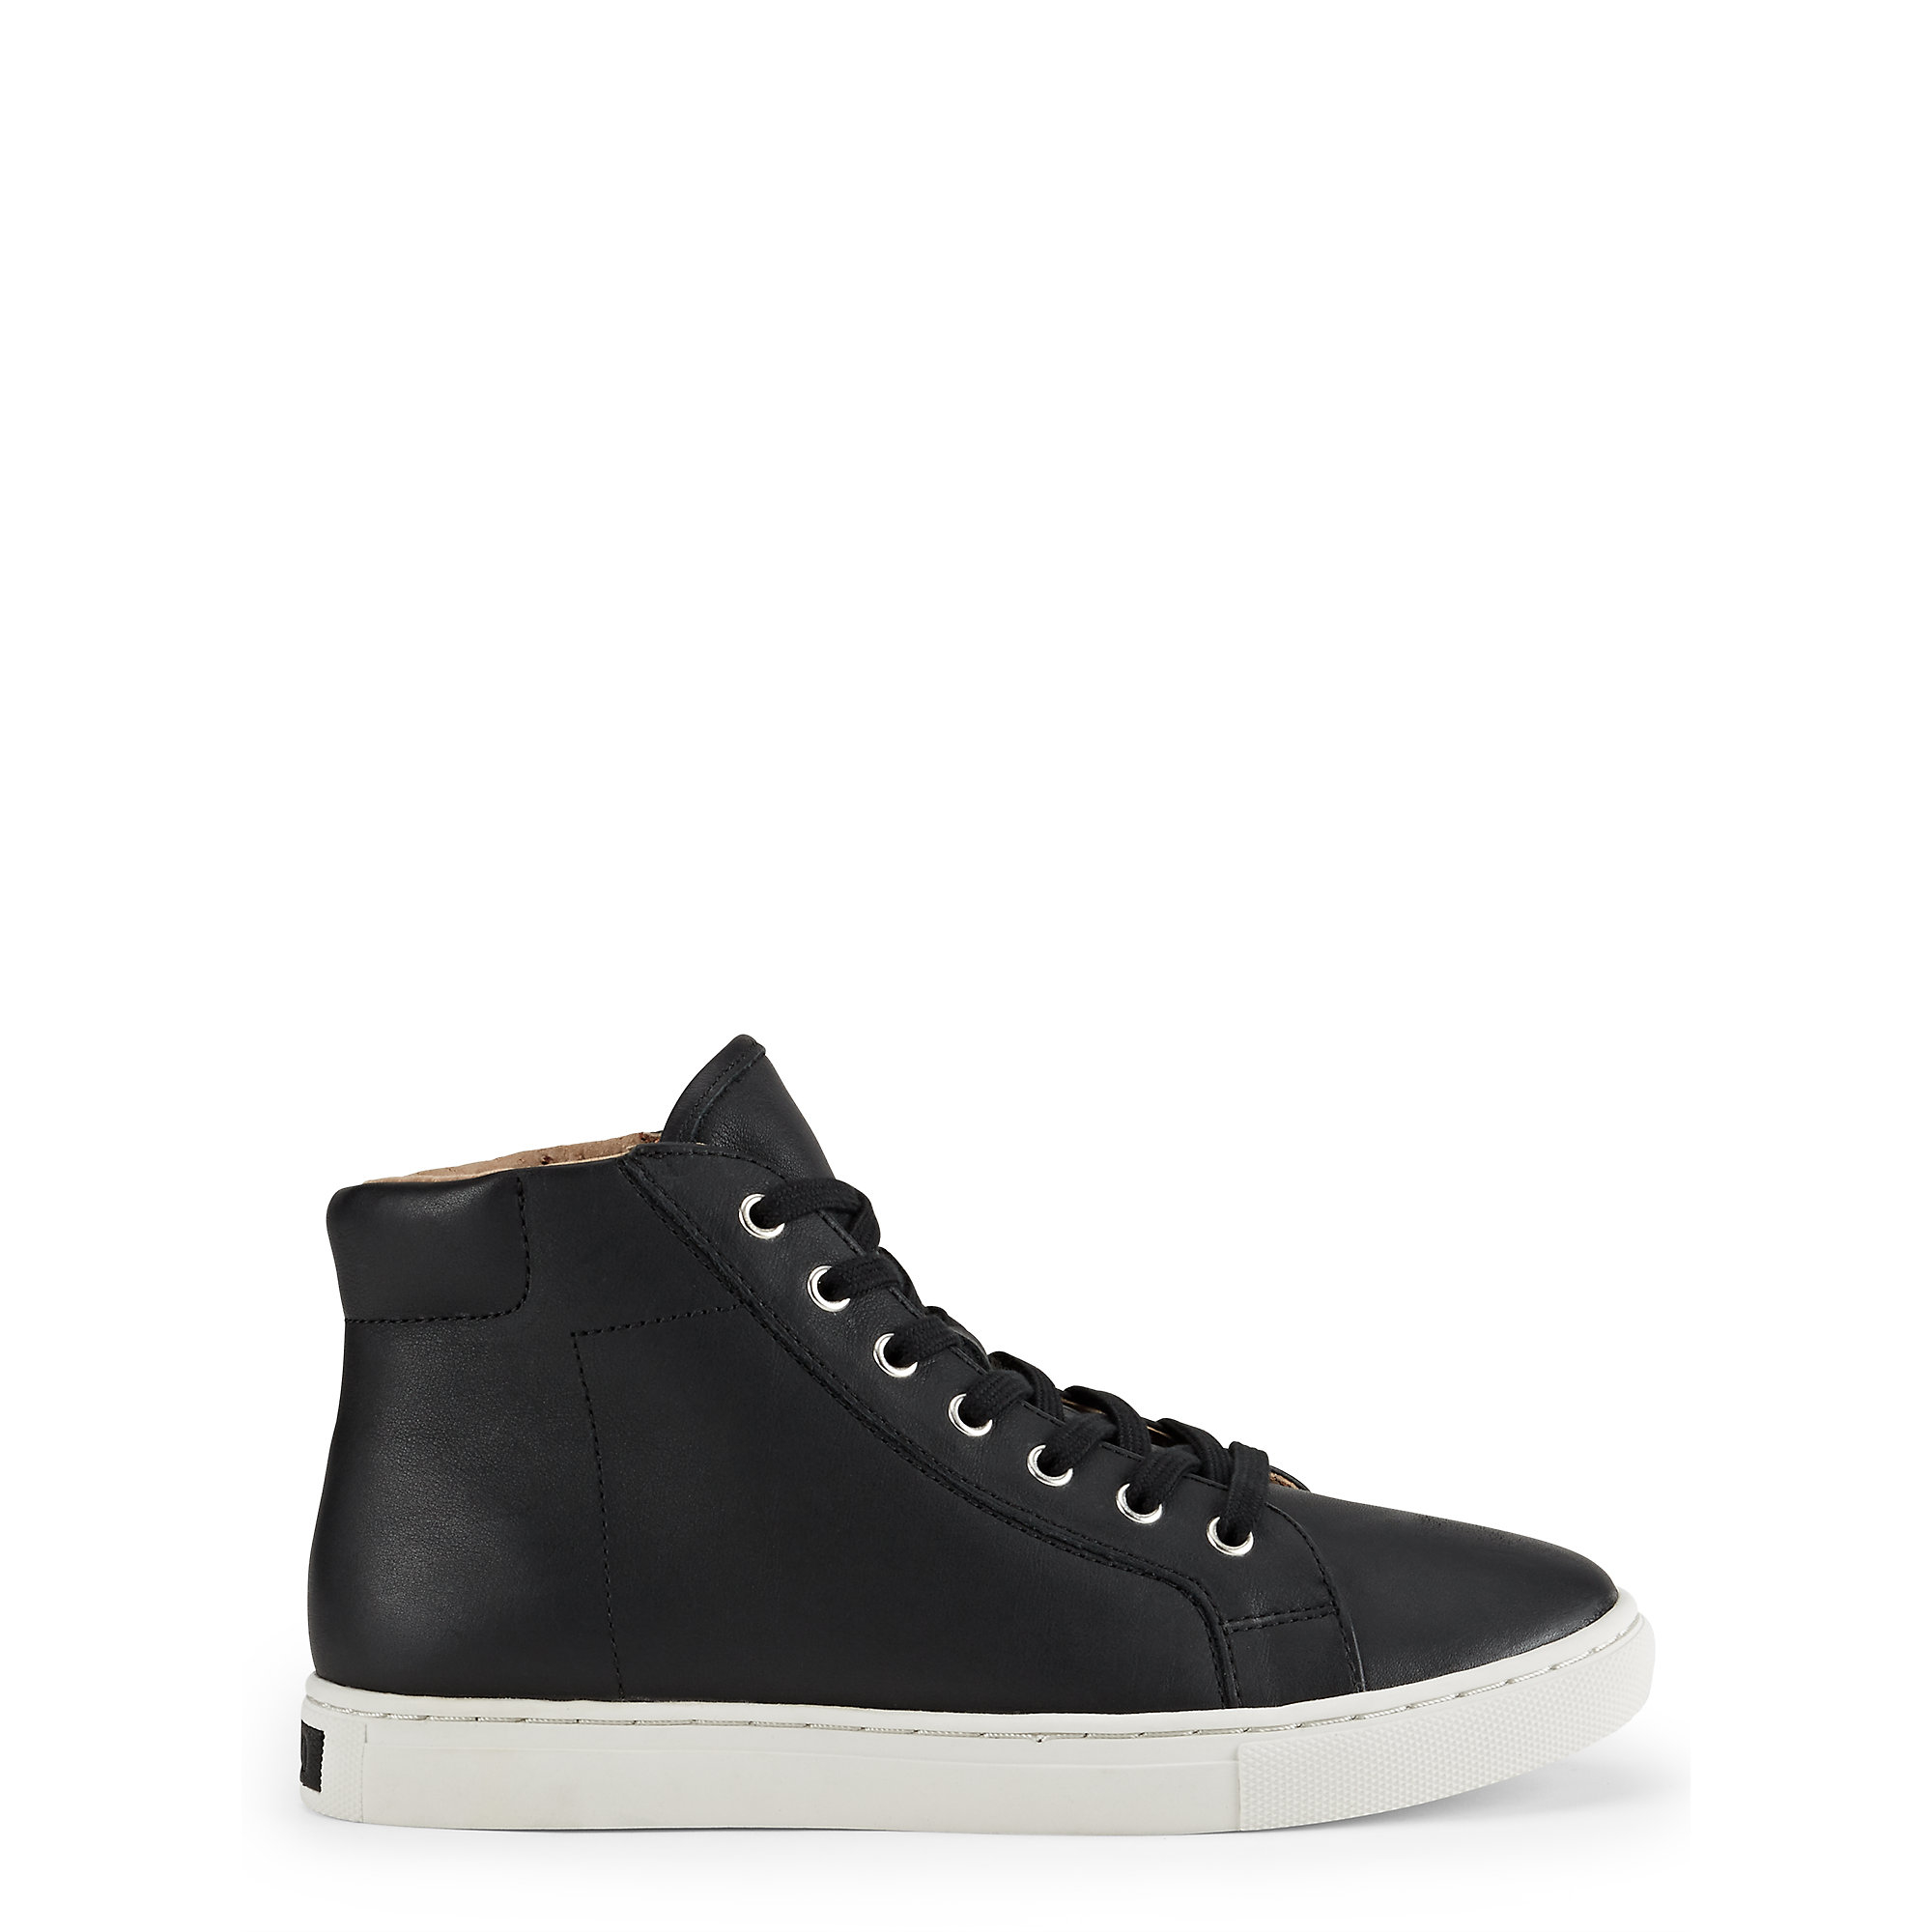 Lyst - Polo Ralph Lauren Nappa Leather High-top Sneaker in Black for Men